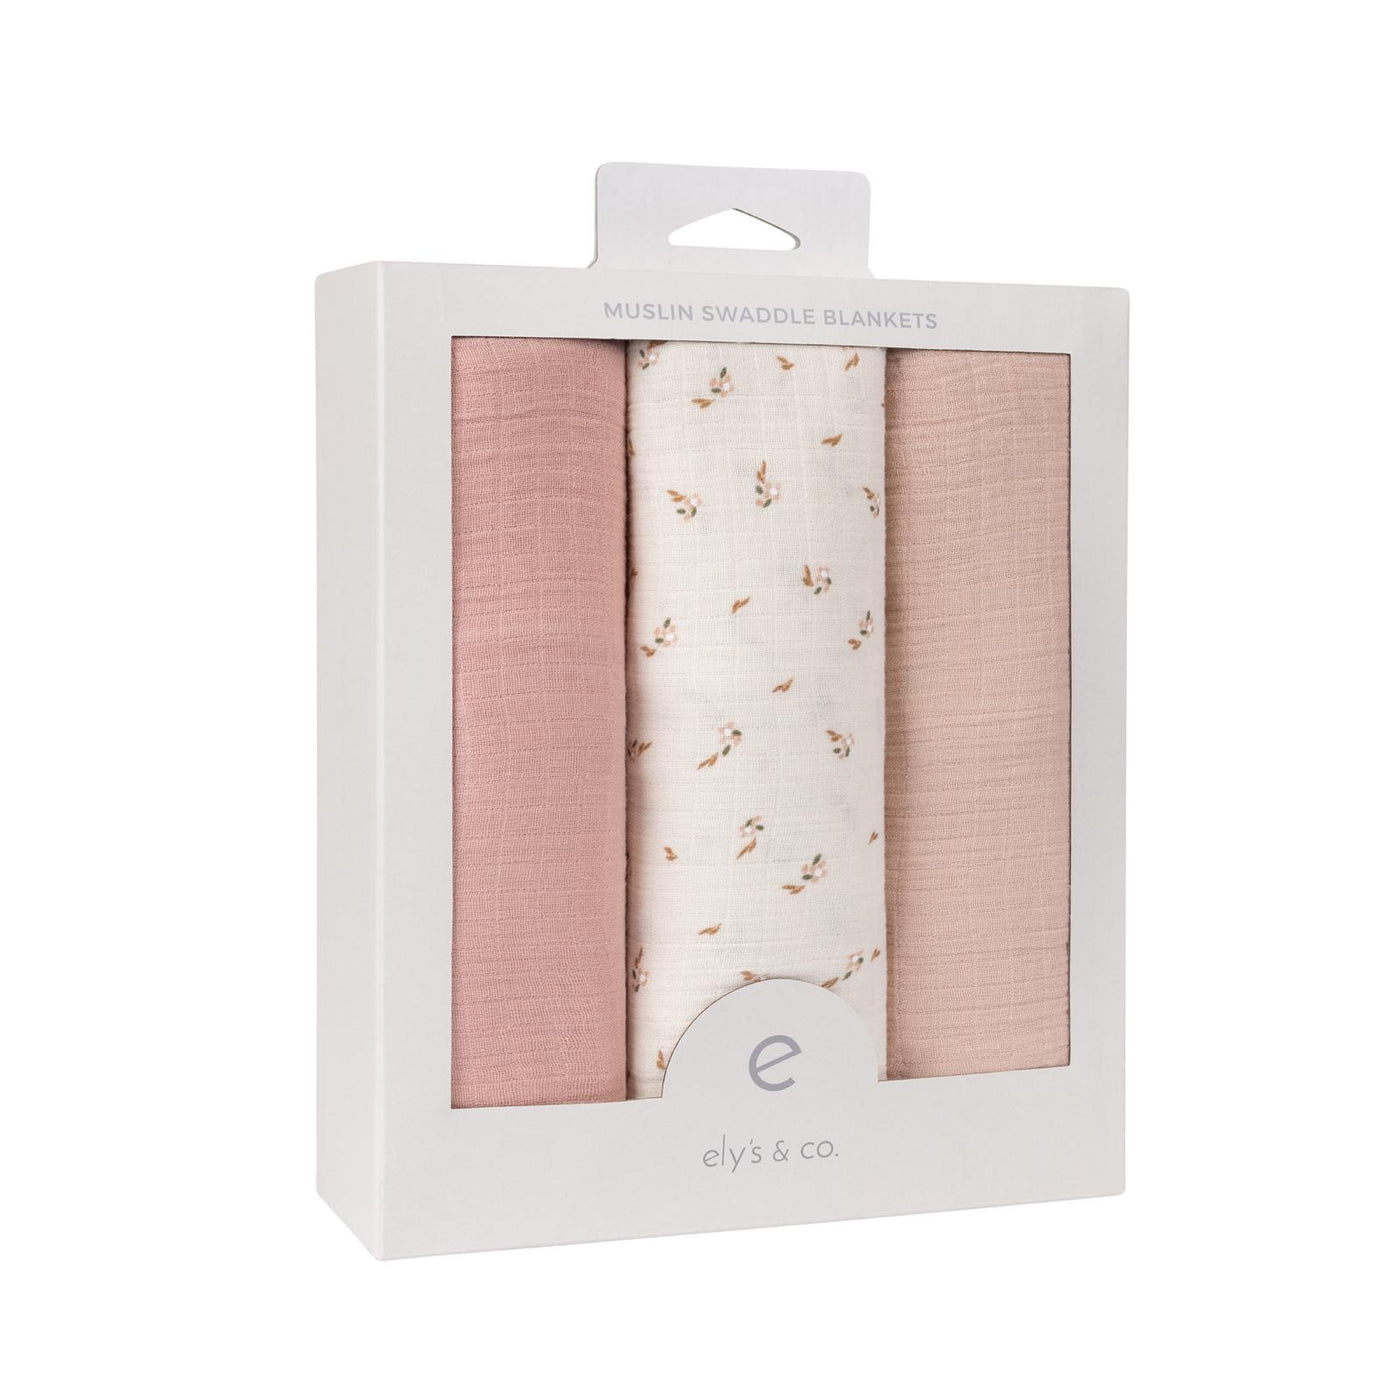 Ely's & Co. Muslin Swaddle Three Pack - Pink Floral Collection